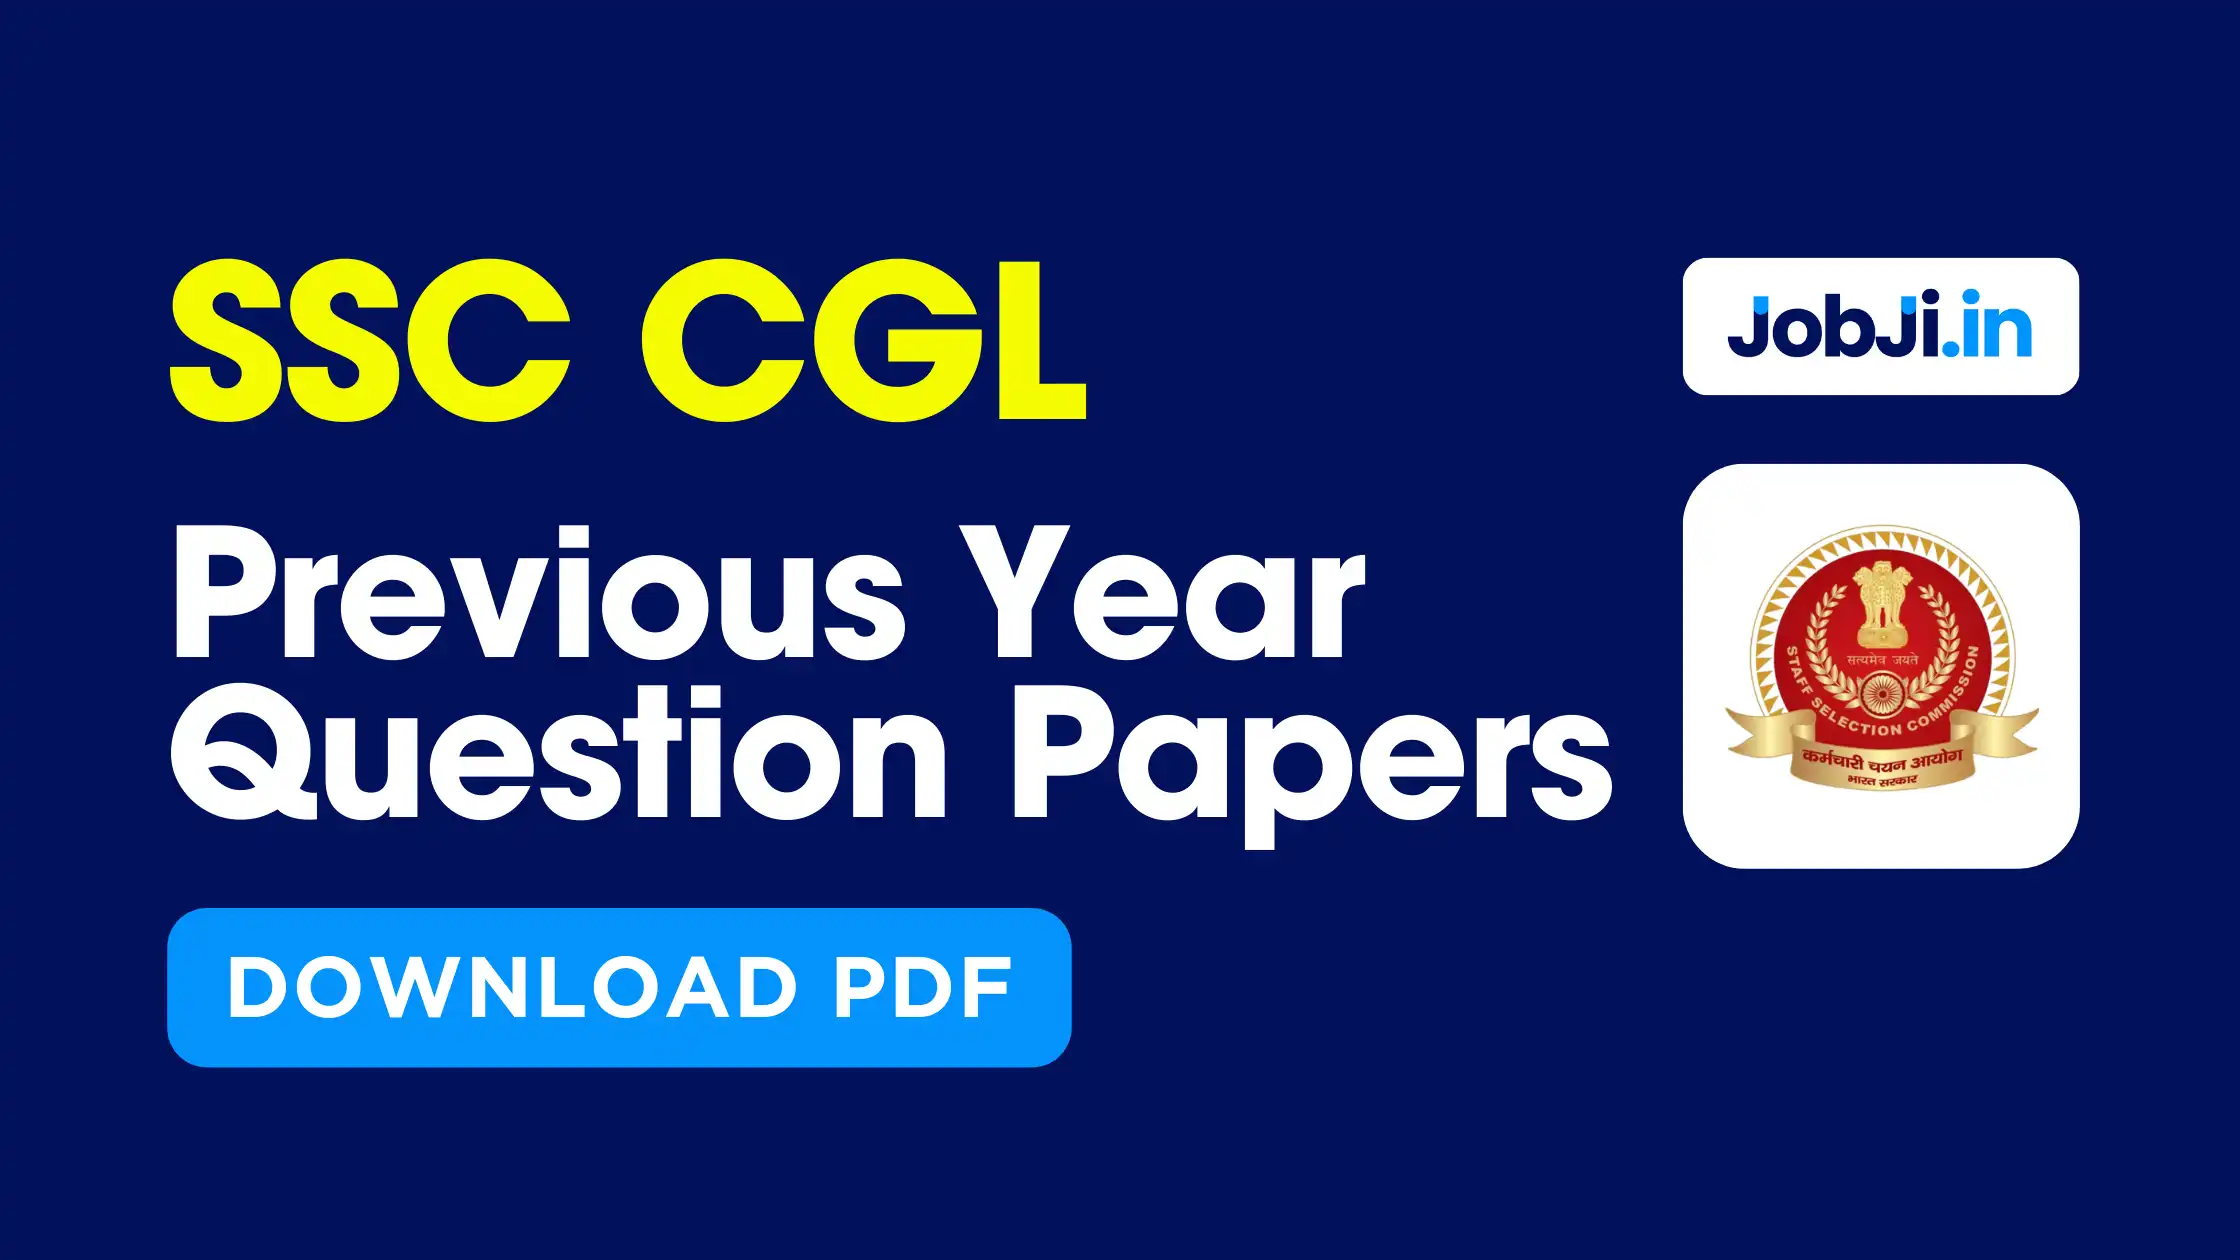 SSC CGL previous year question papers